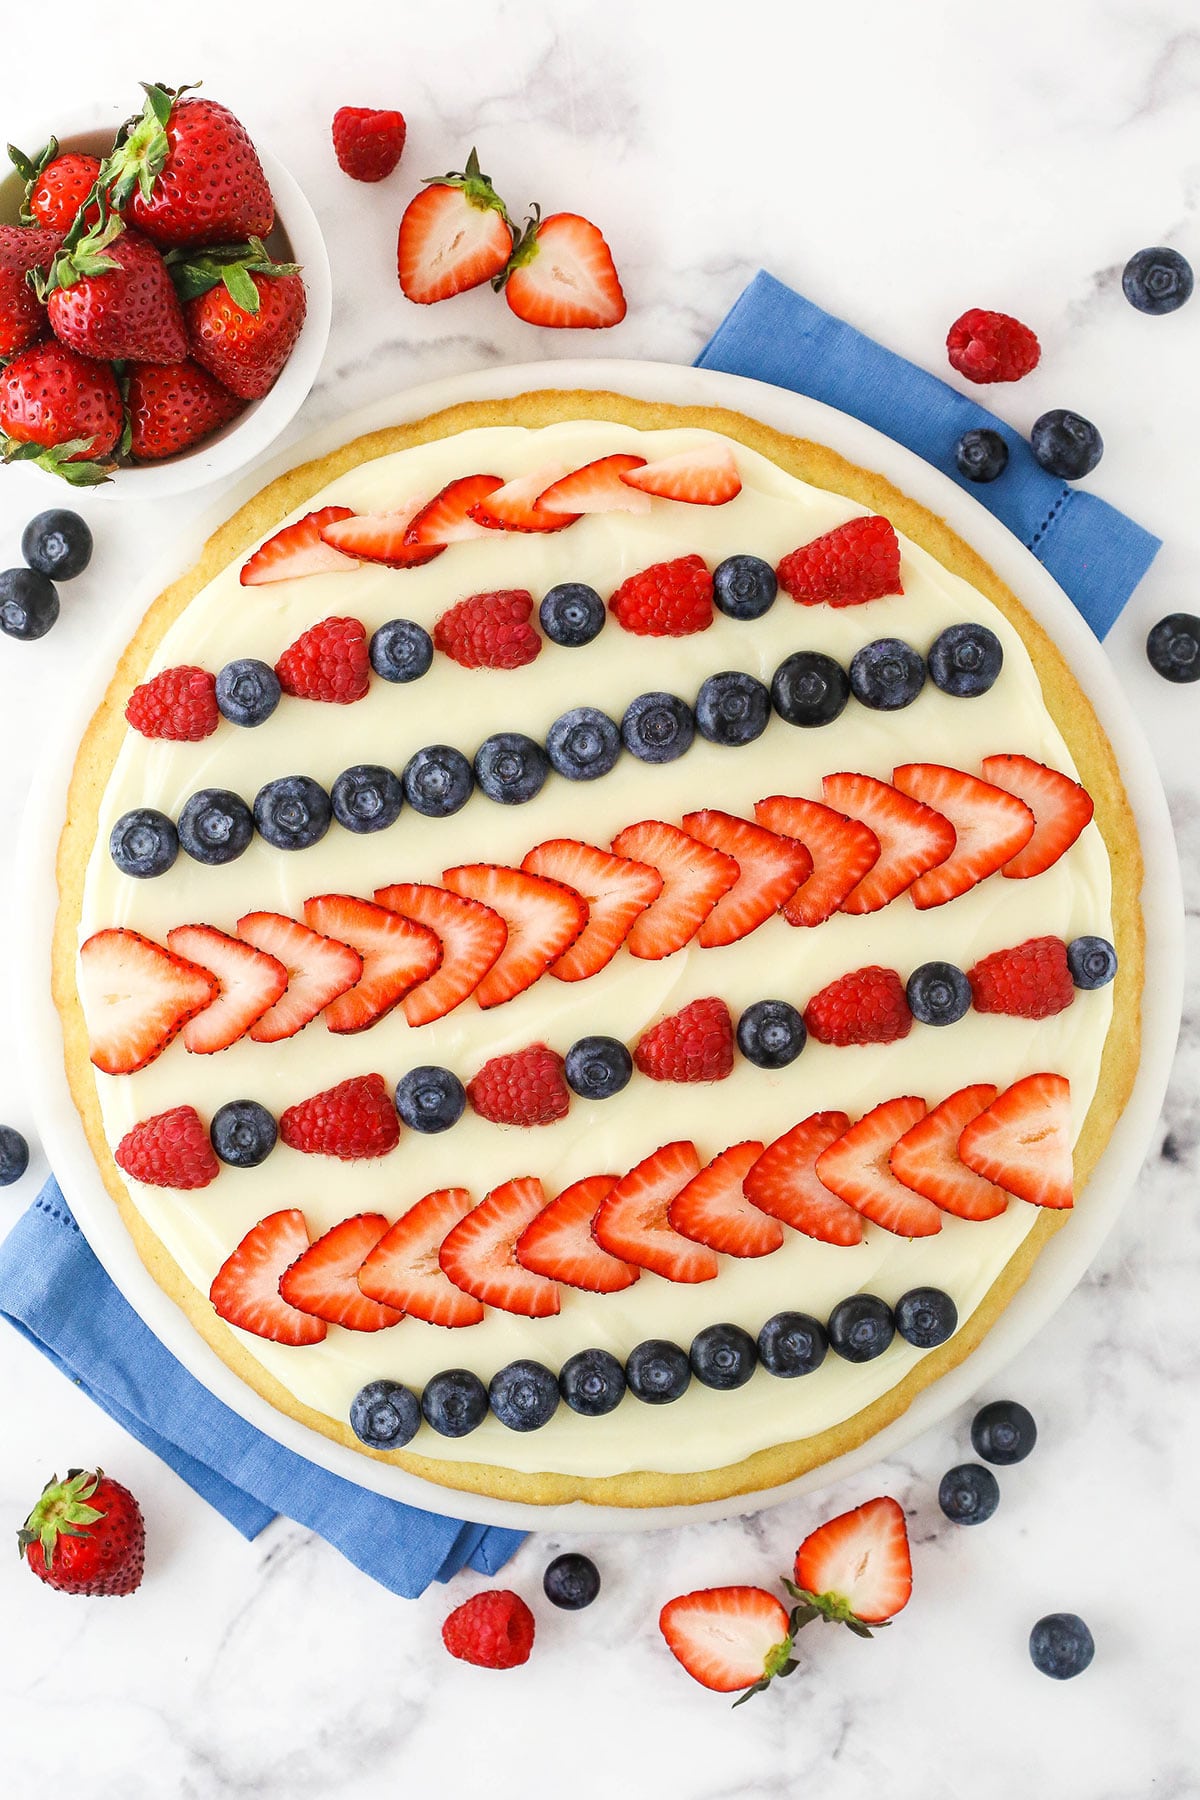 A large round sugar cookie base topped with cream cheese frosting, strawberries, raspberries and blueberries